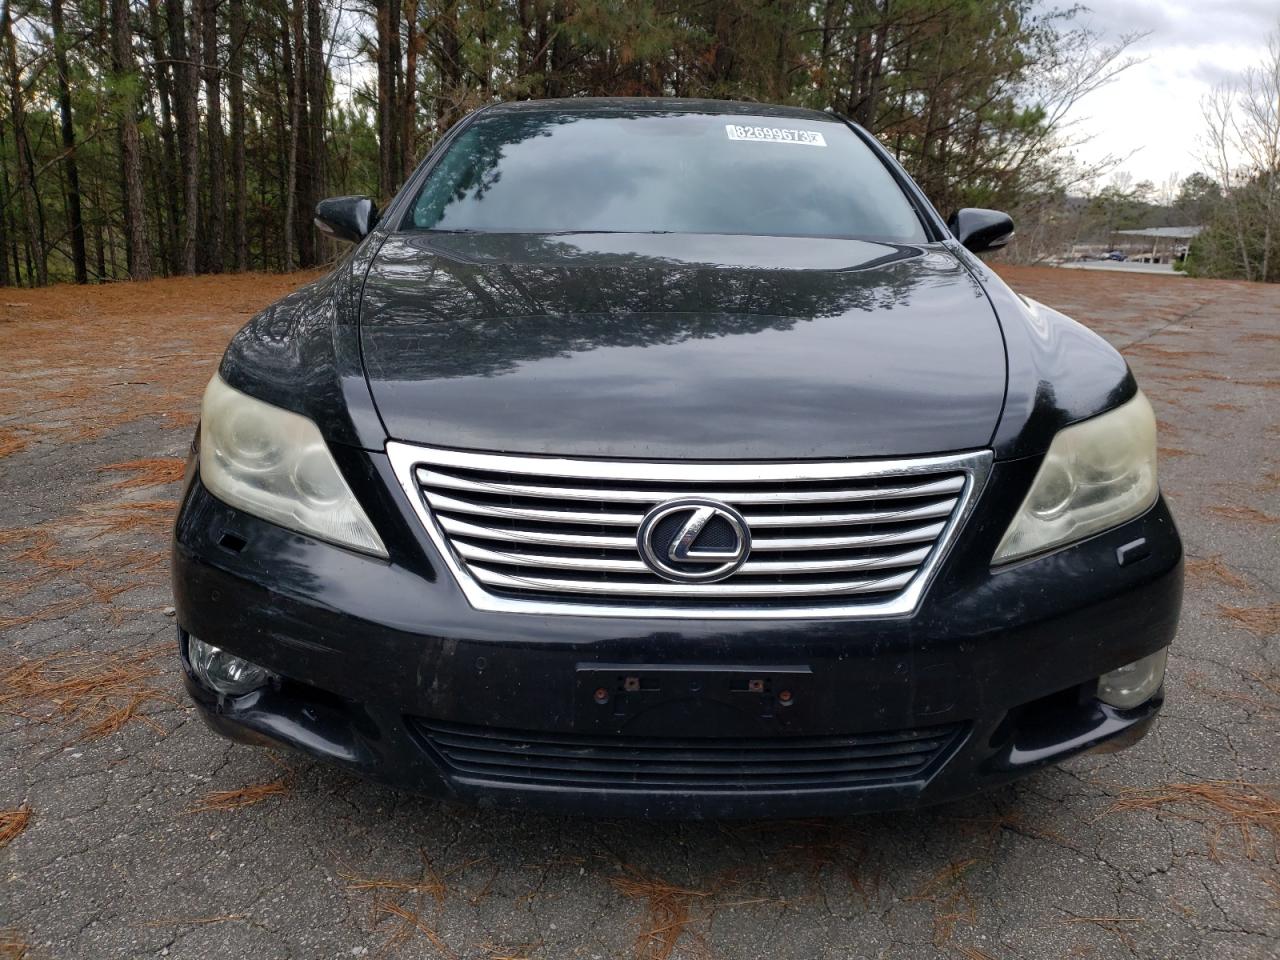 JTHCL5EF9A5****** Used and Repairable 2010 Lexus LS 460 in Alabama State